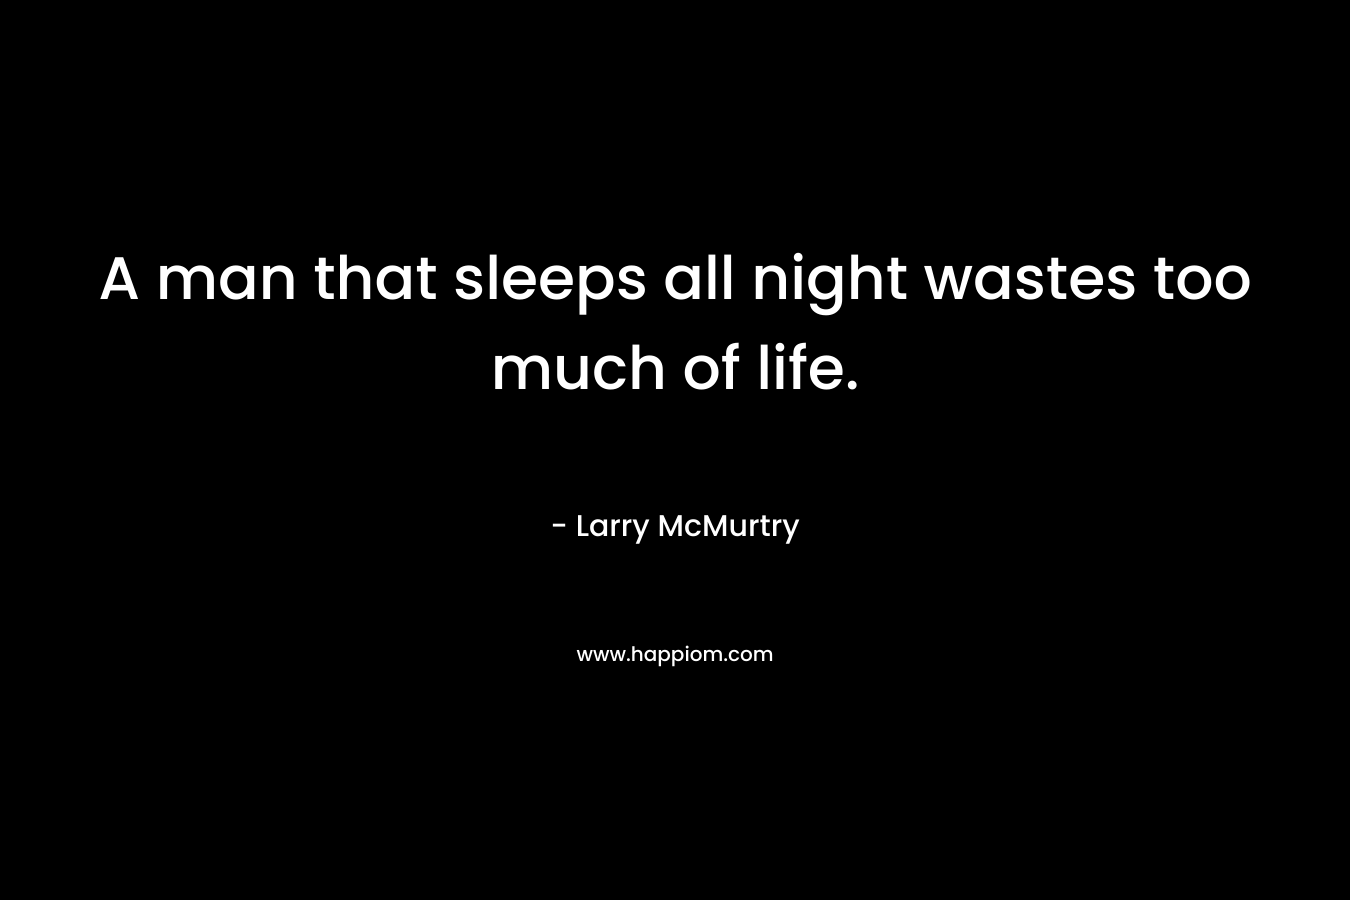 A man that sleeps all night wastes too much of life. – Larry McMurtry